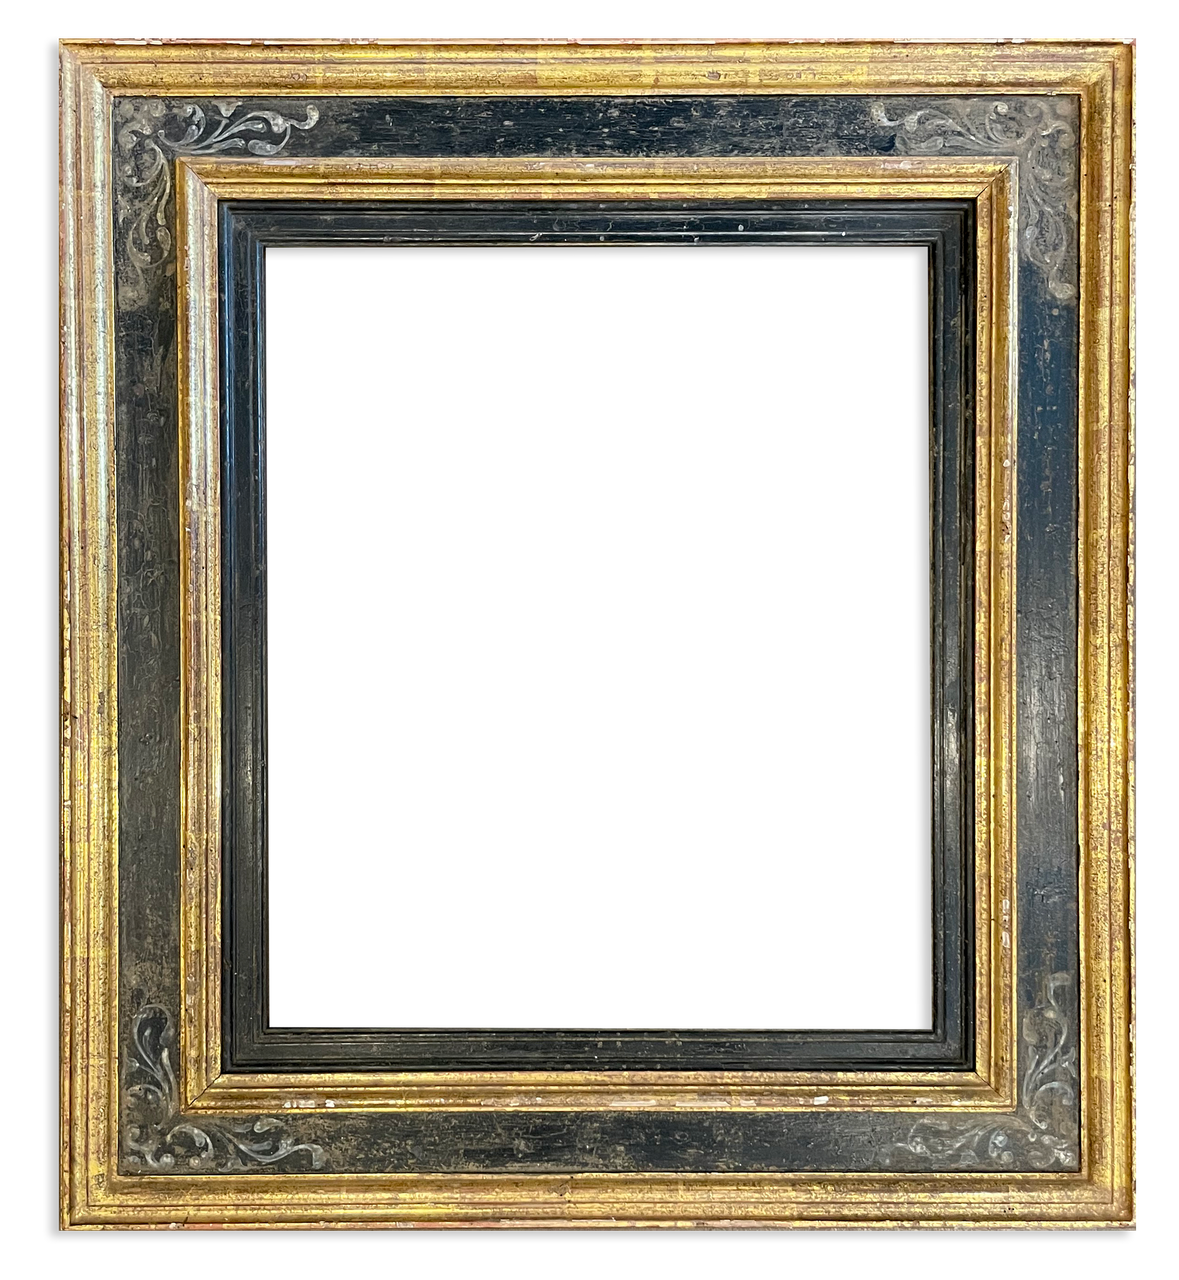  20x20 Frame Black and Gold Ornate Fitz Solid Wood